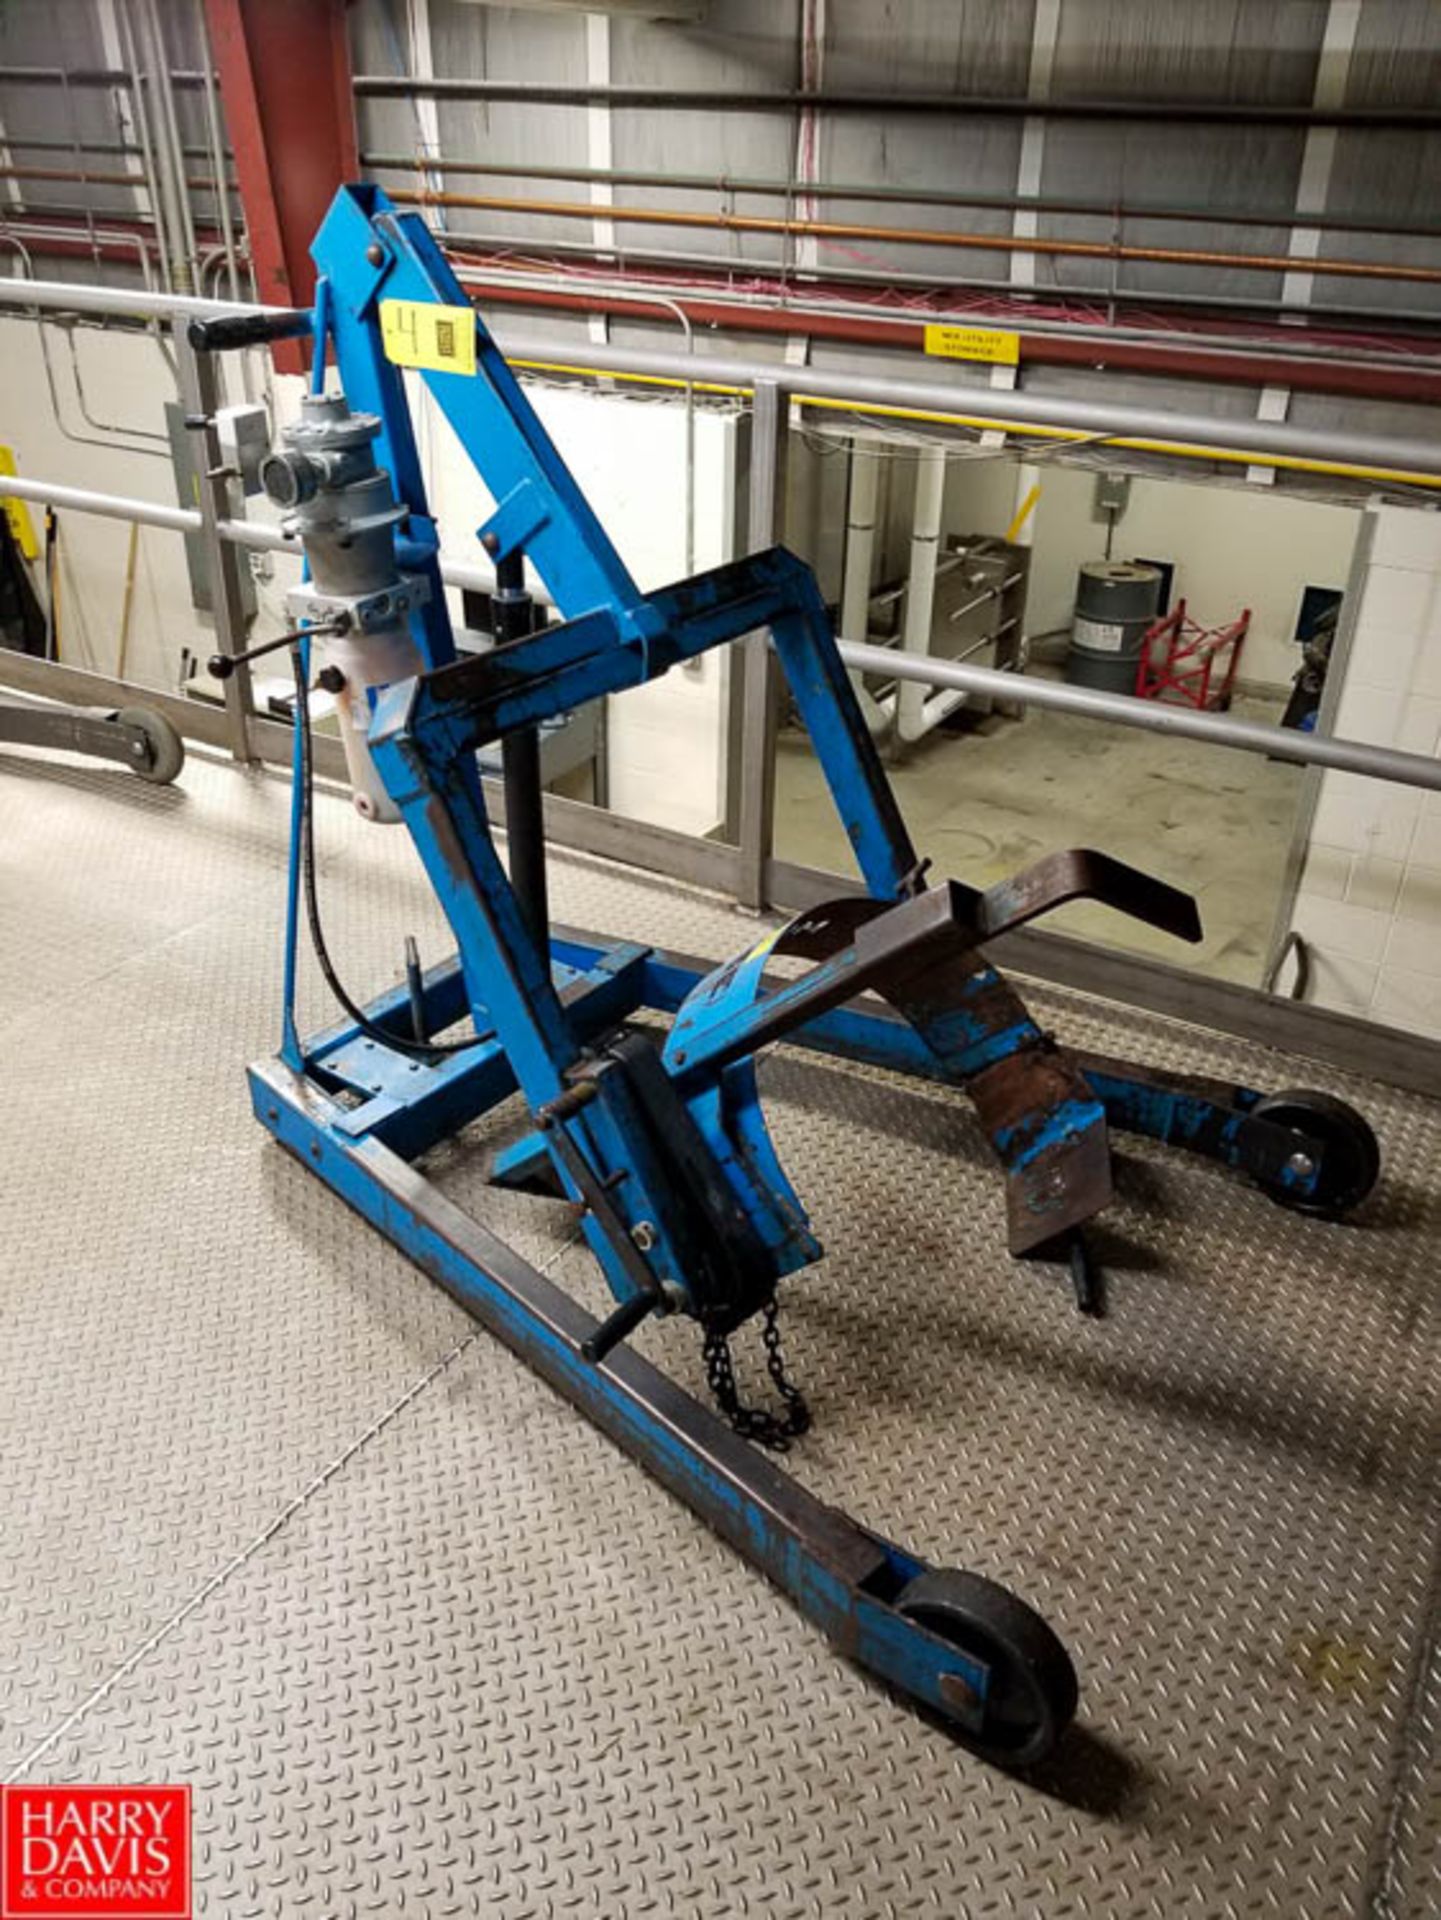 Morse Drum Lifts 800 lb. Capacity, with Pneumatic Motor Model: 400A60 Rigging Fee: $50